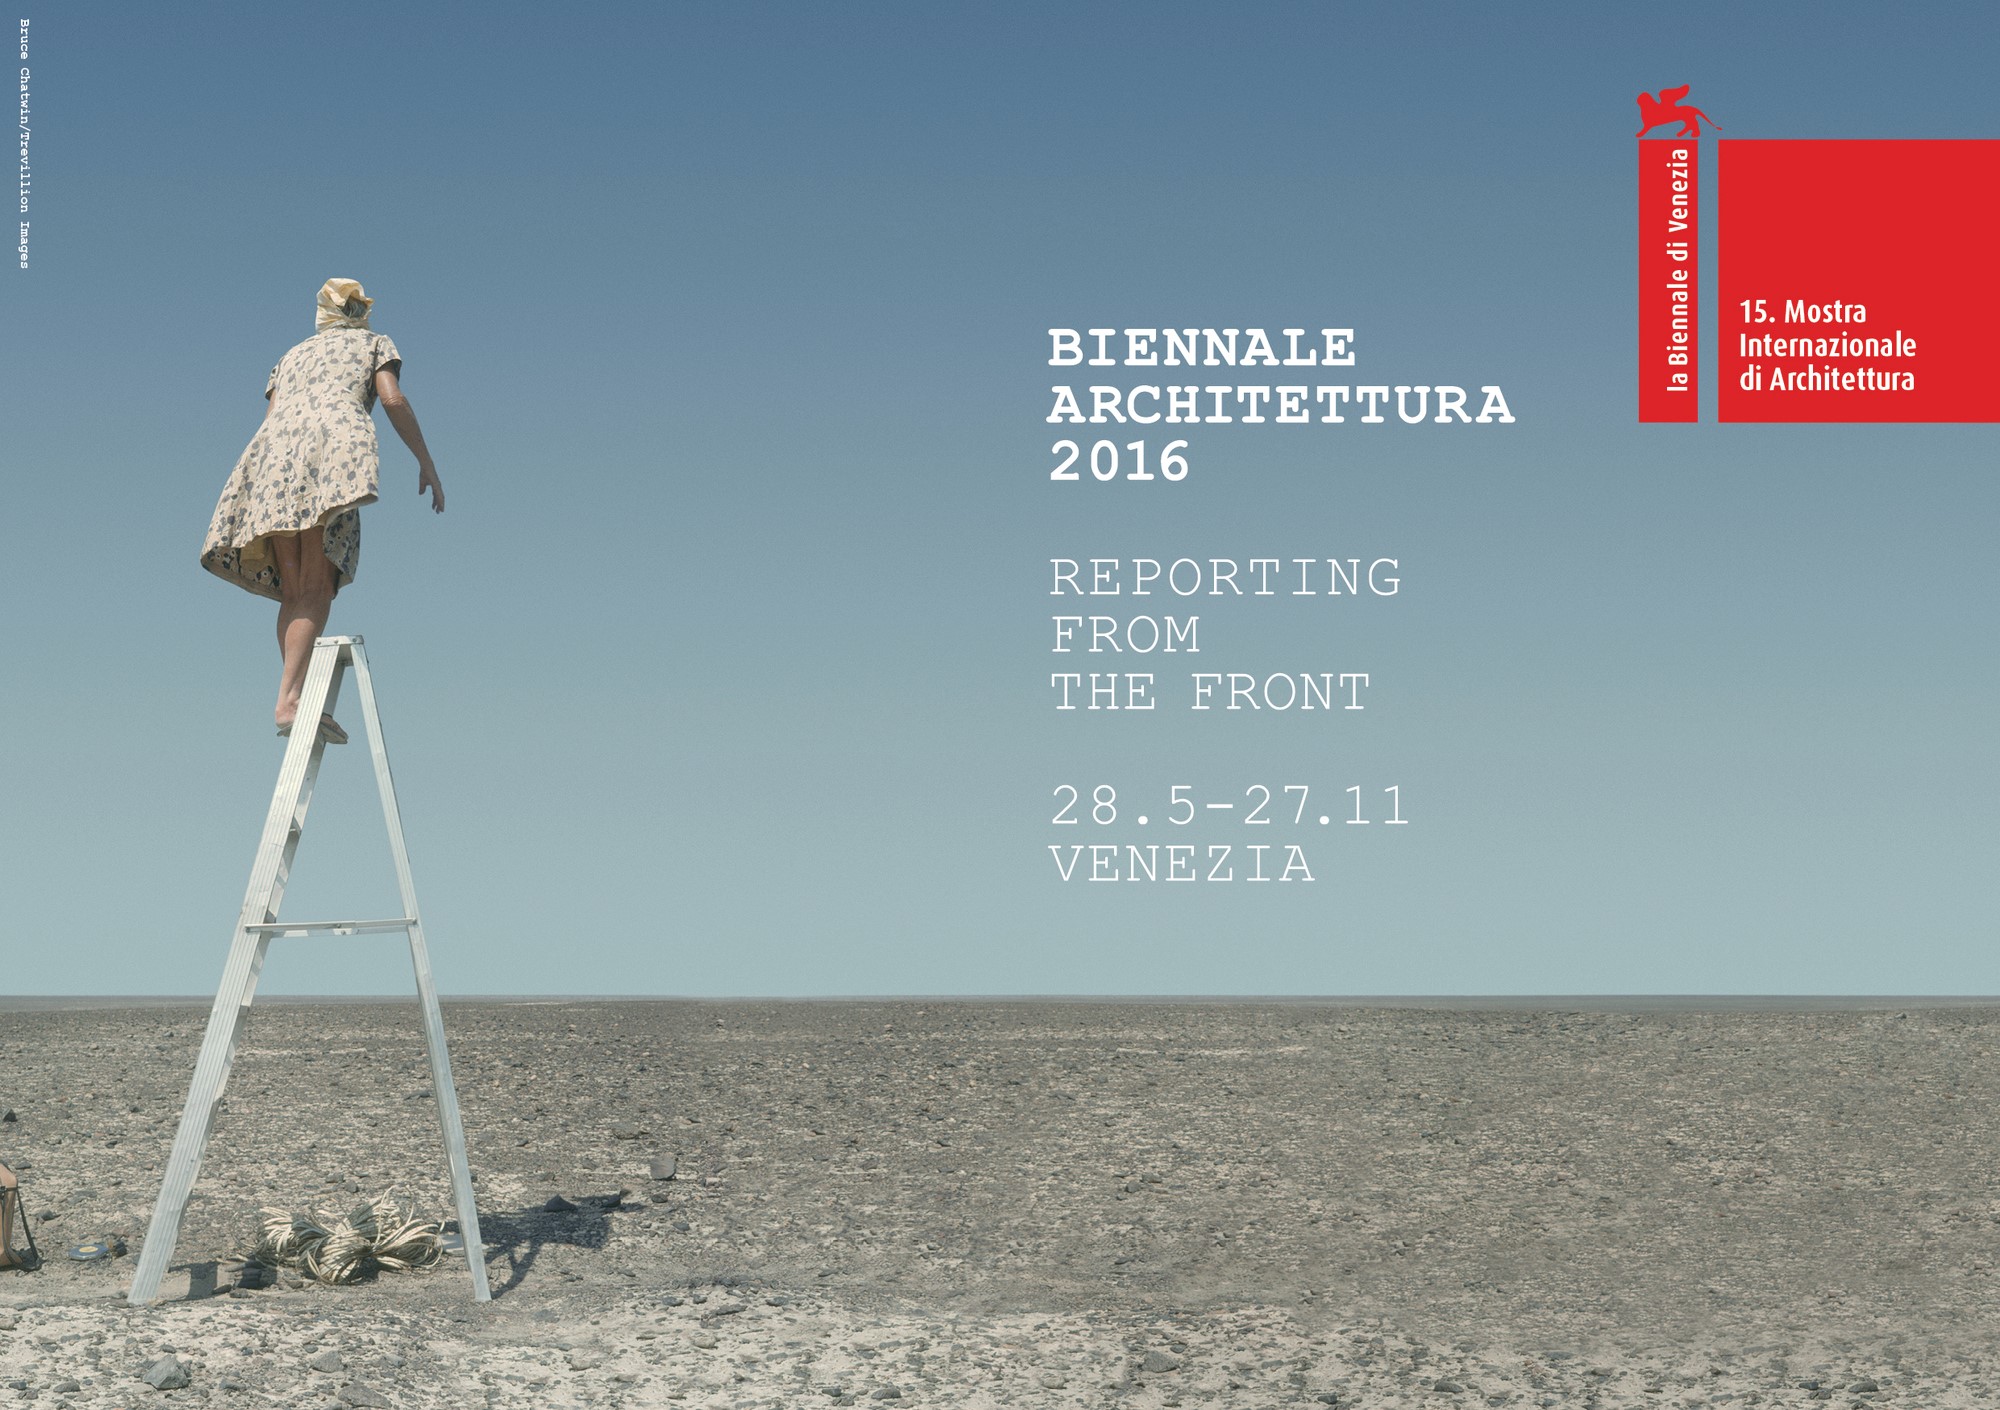 More than a Building: The 15th Venice Architecture Biennale